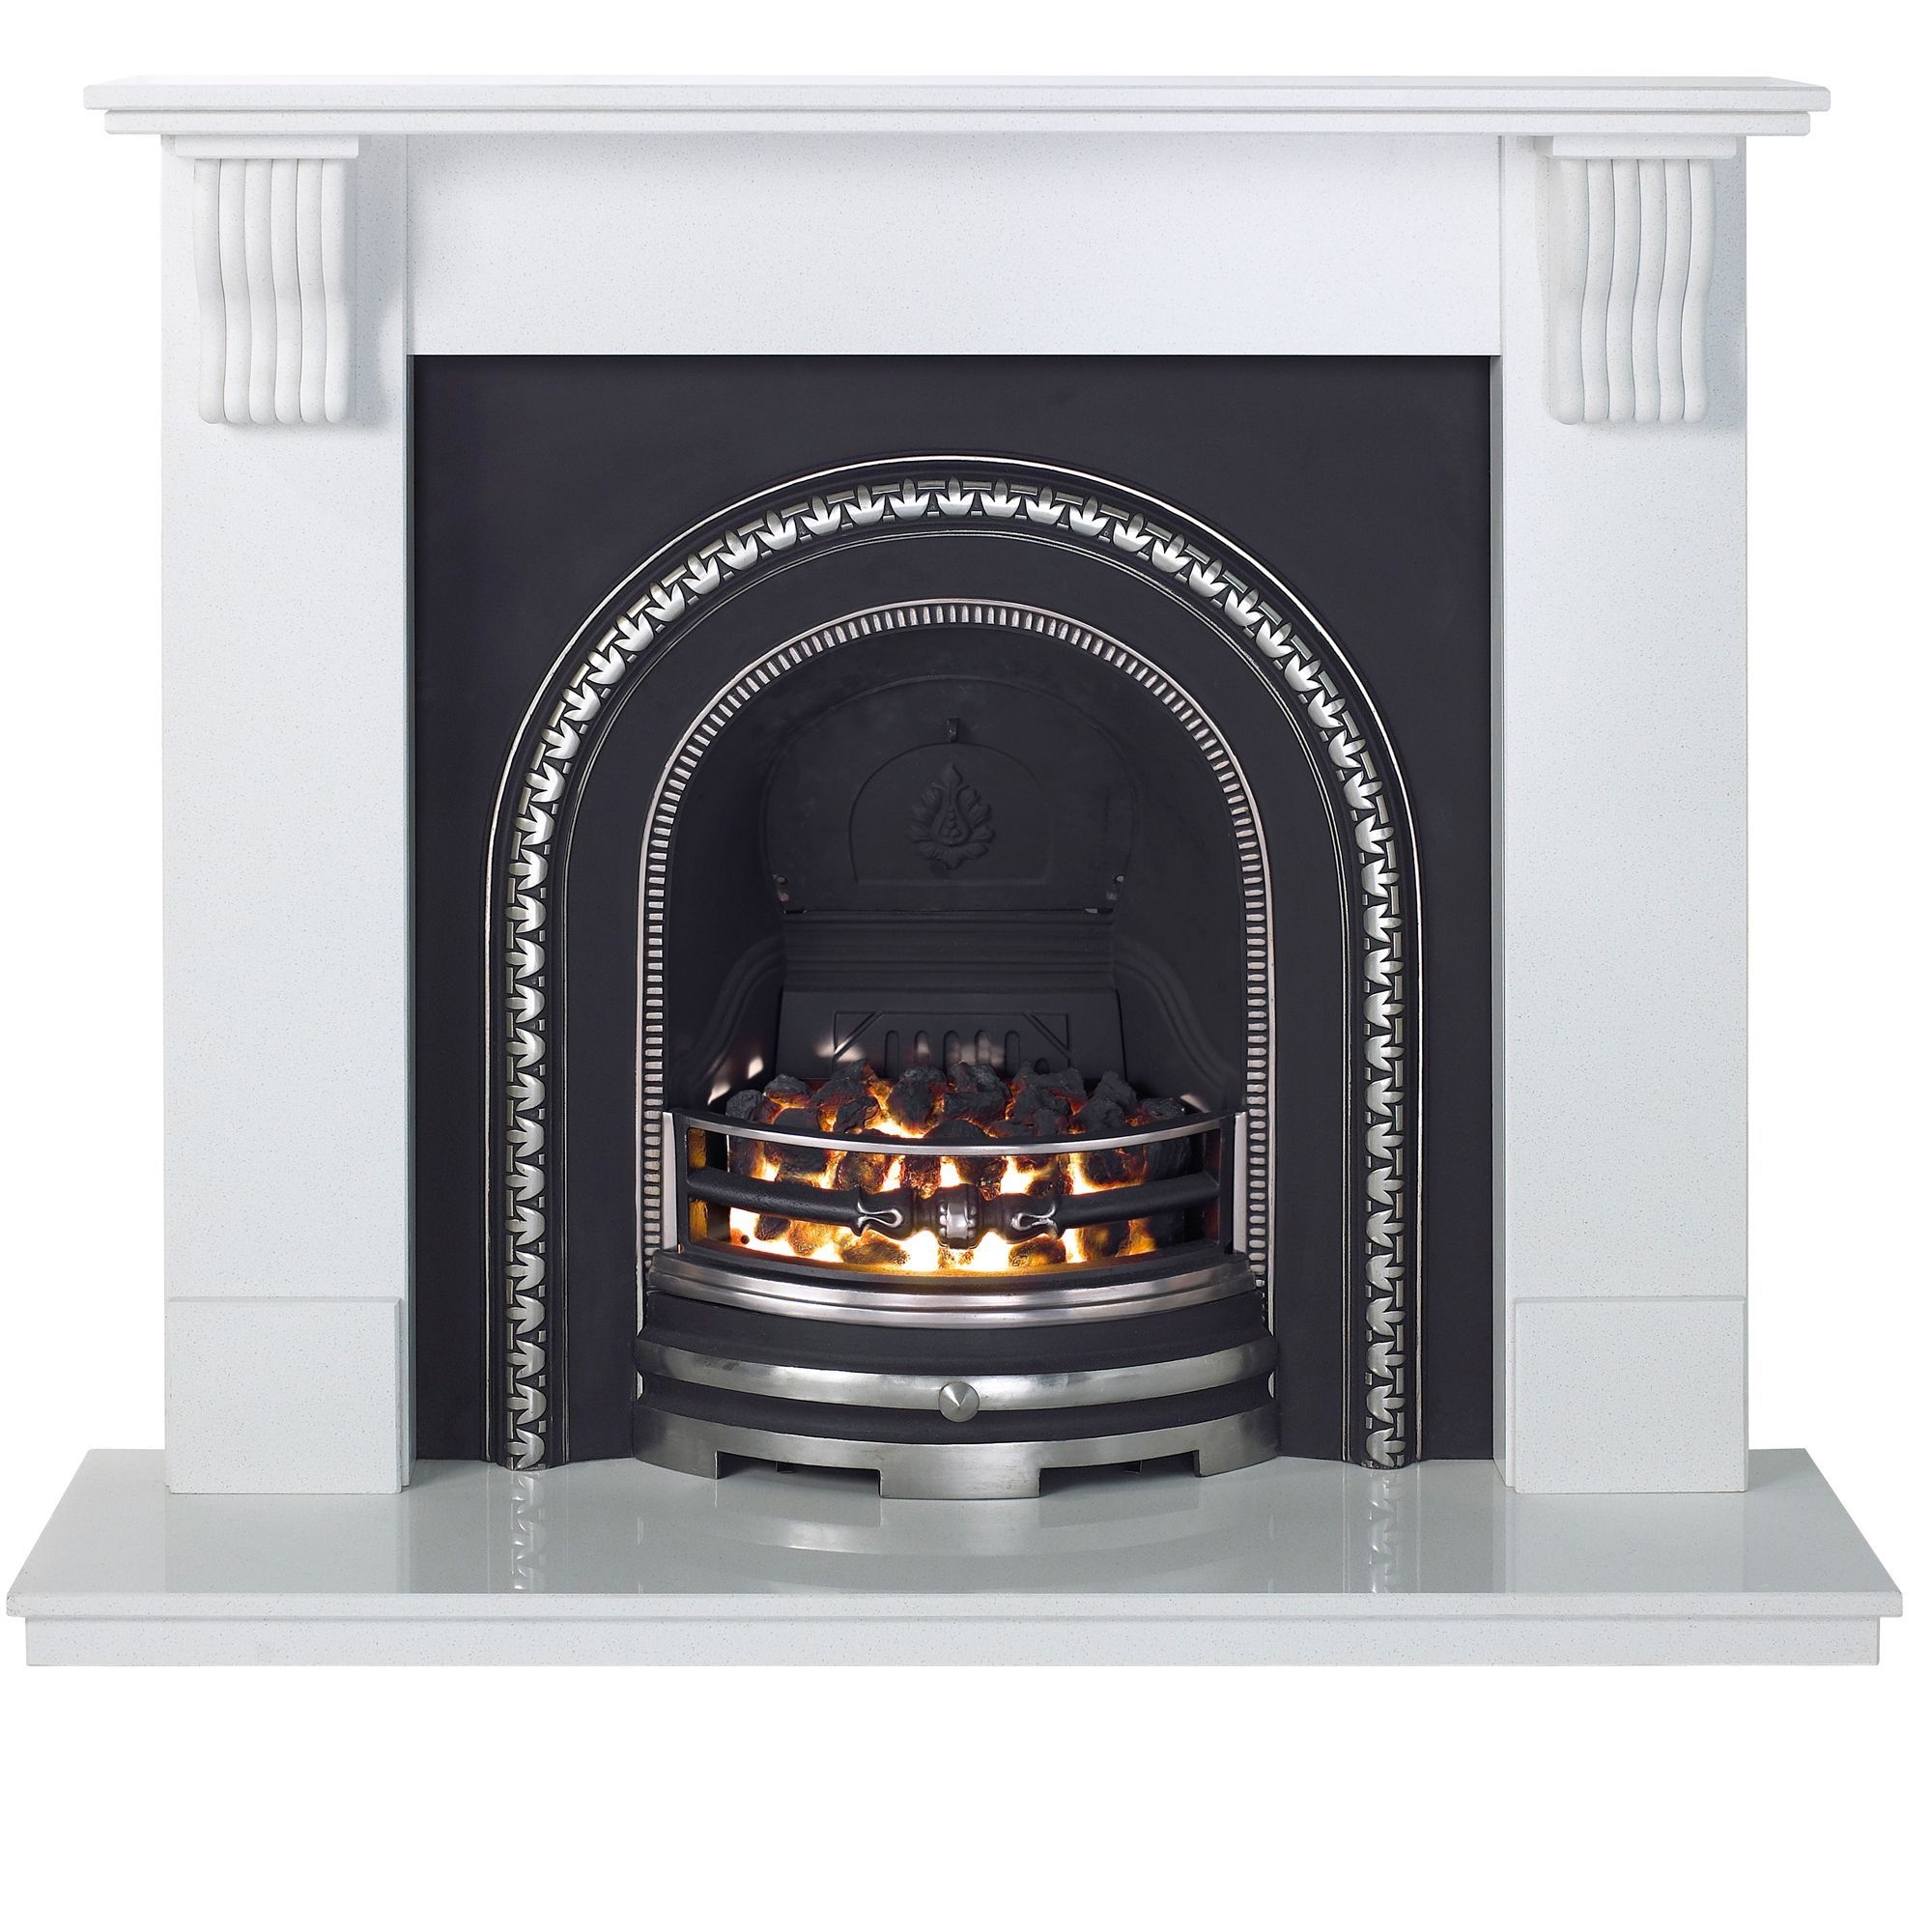 Fake Fireplaces Sale New Pin On Sitting Room